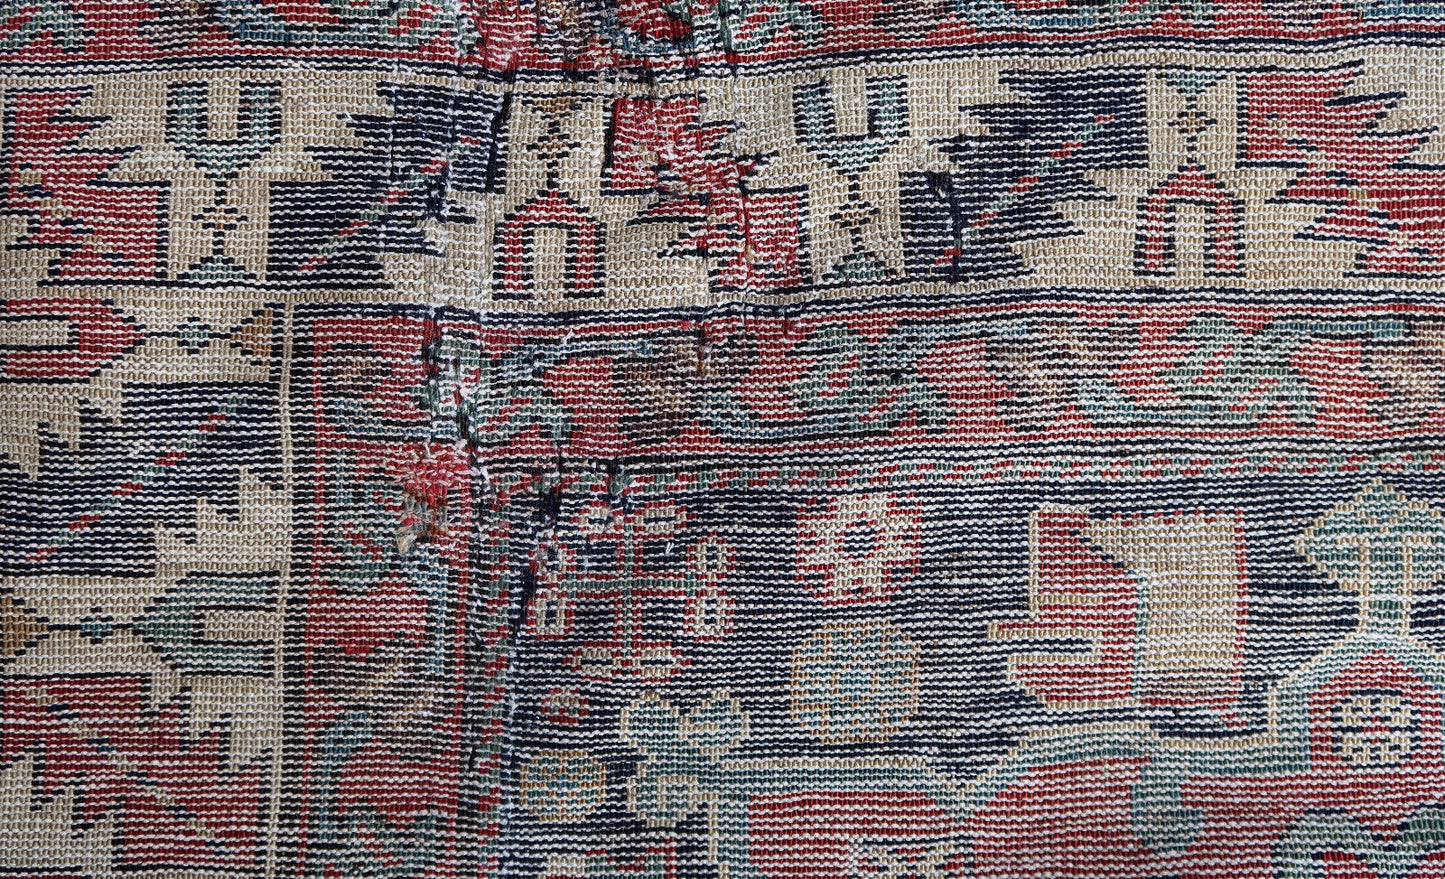 Handmade antique Persian Karajeh rug in bright colors. This collectible rug is from the middle of 19th century in original condition, it has some old restorations.